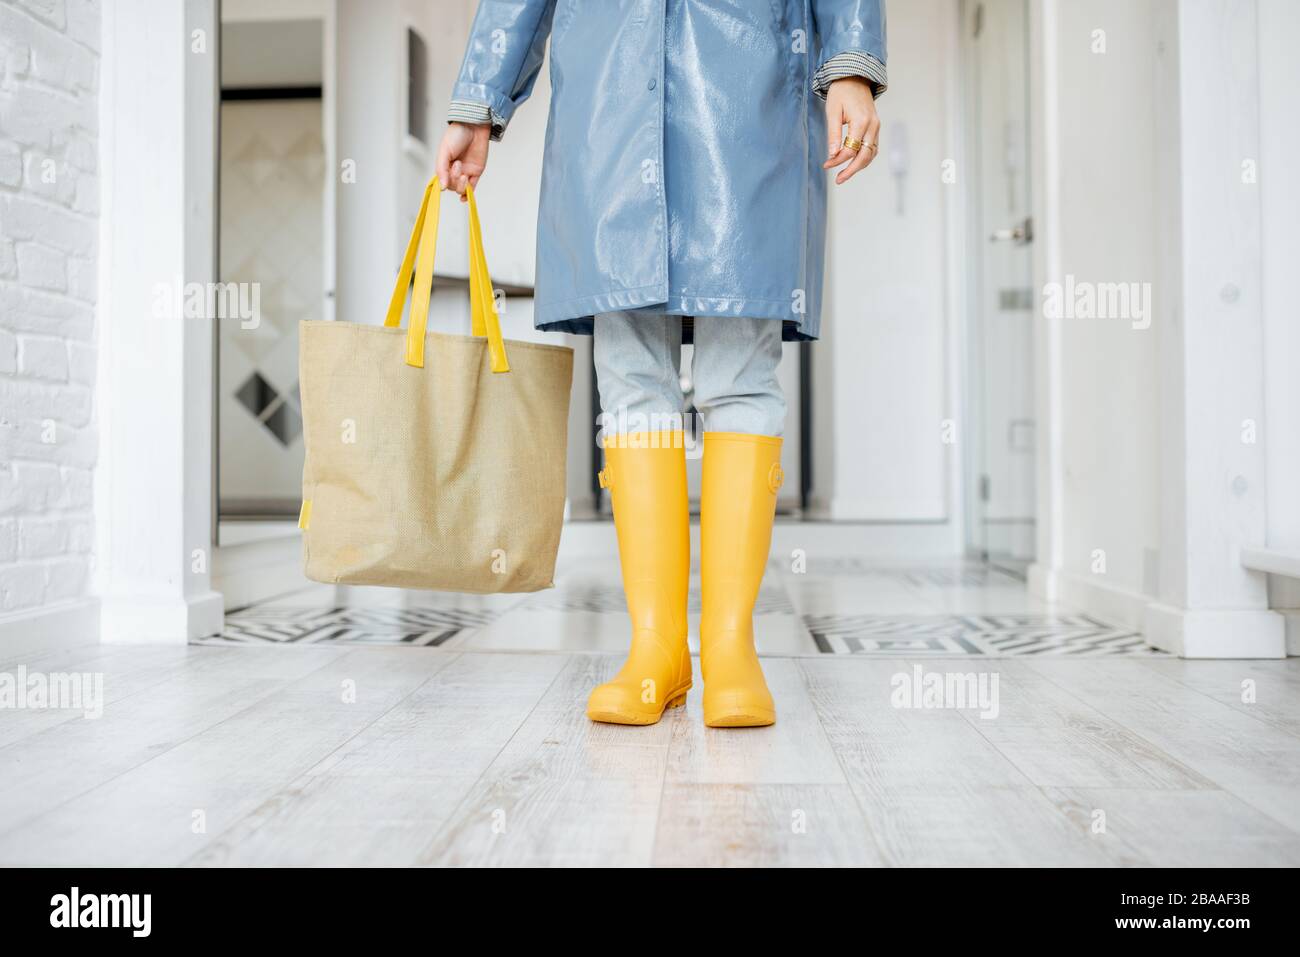 Woman in yellow rubber boots and raincoat standing with shopping bag in the corridor at home, ready to walk outside in rainy weather Stock Photo